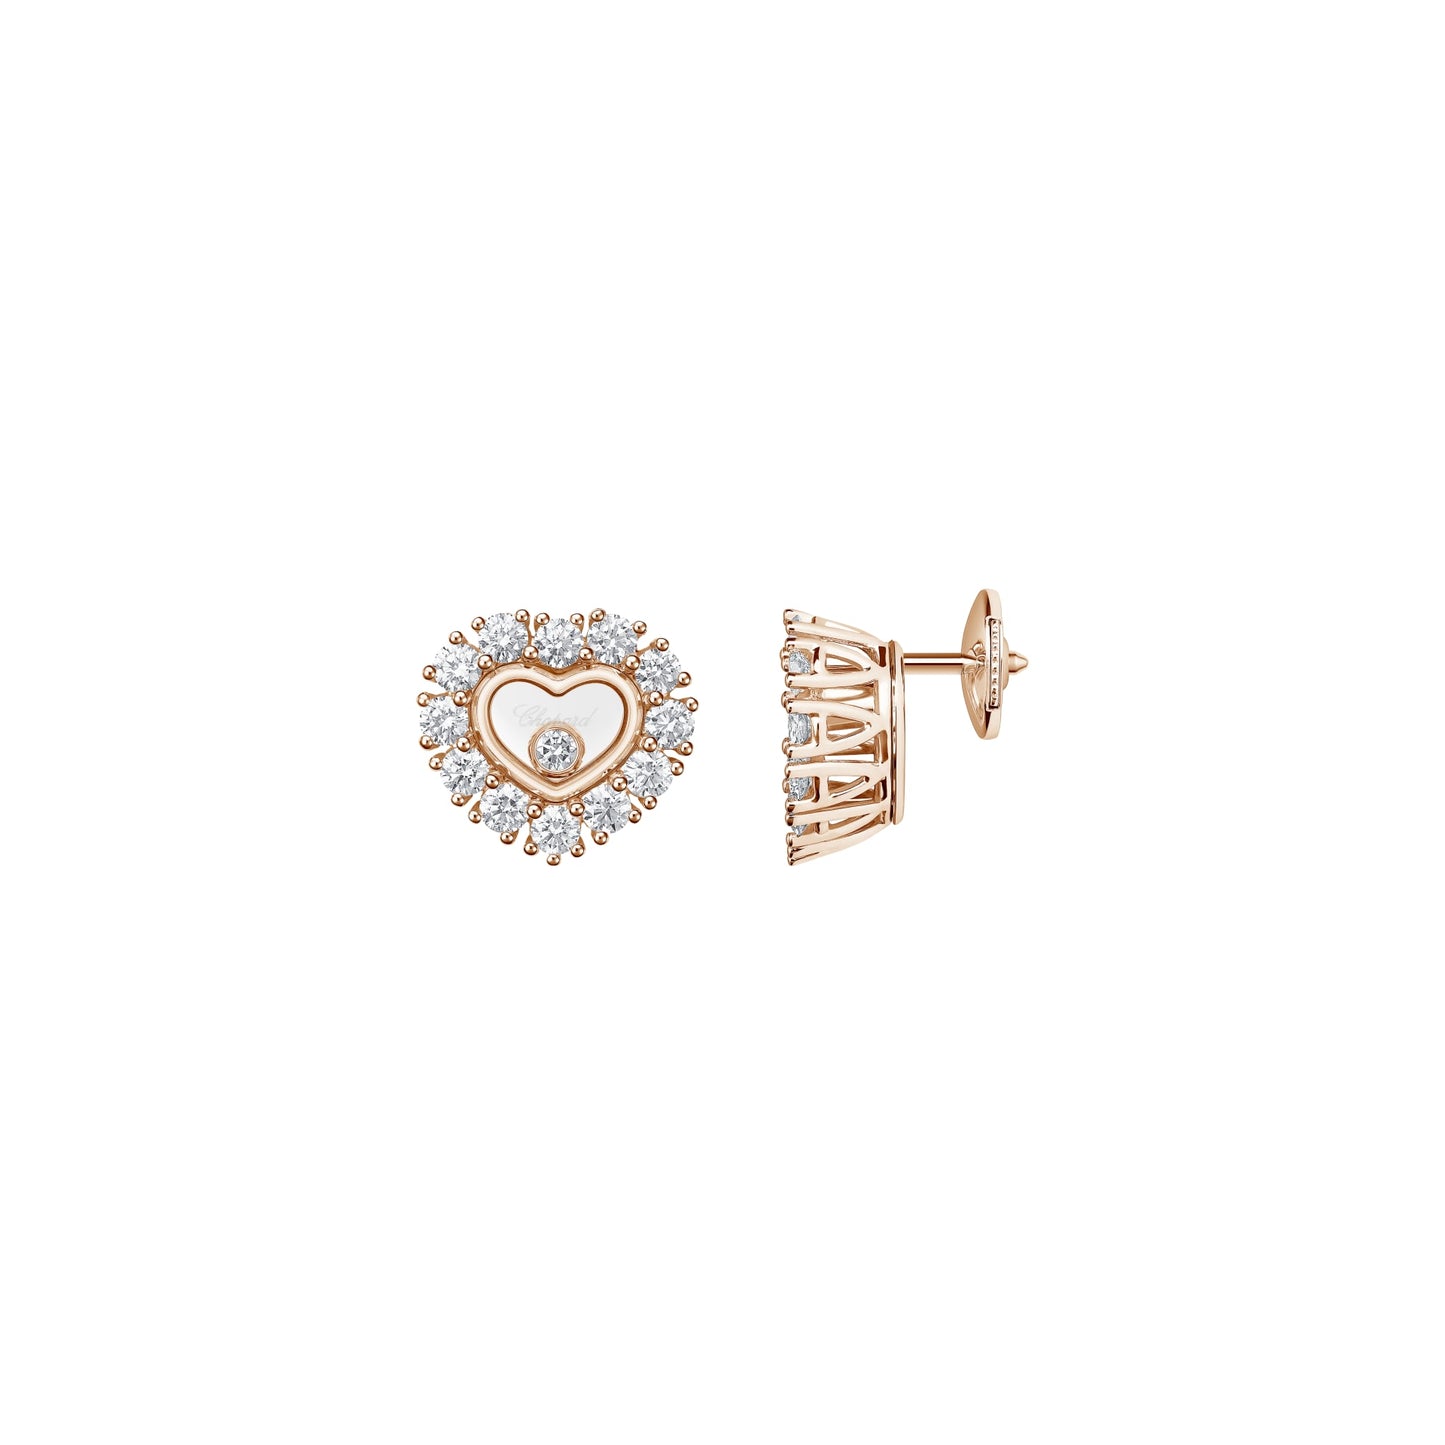 HAPPY DIAMONDS ICONS JOAILLERIE EARRINGS, ETHICAL ROSE GOLD, DIAMONDS 83A616-5001